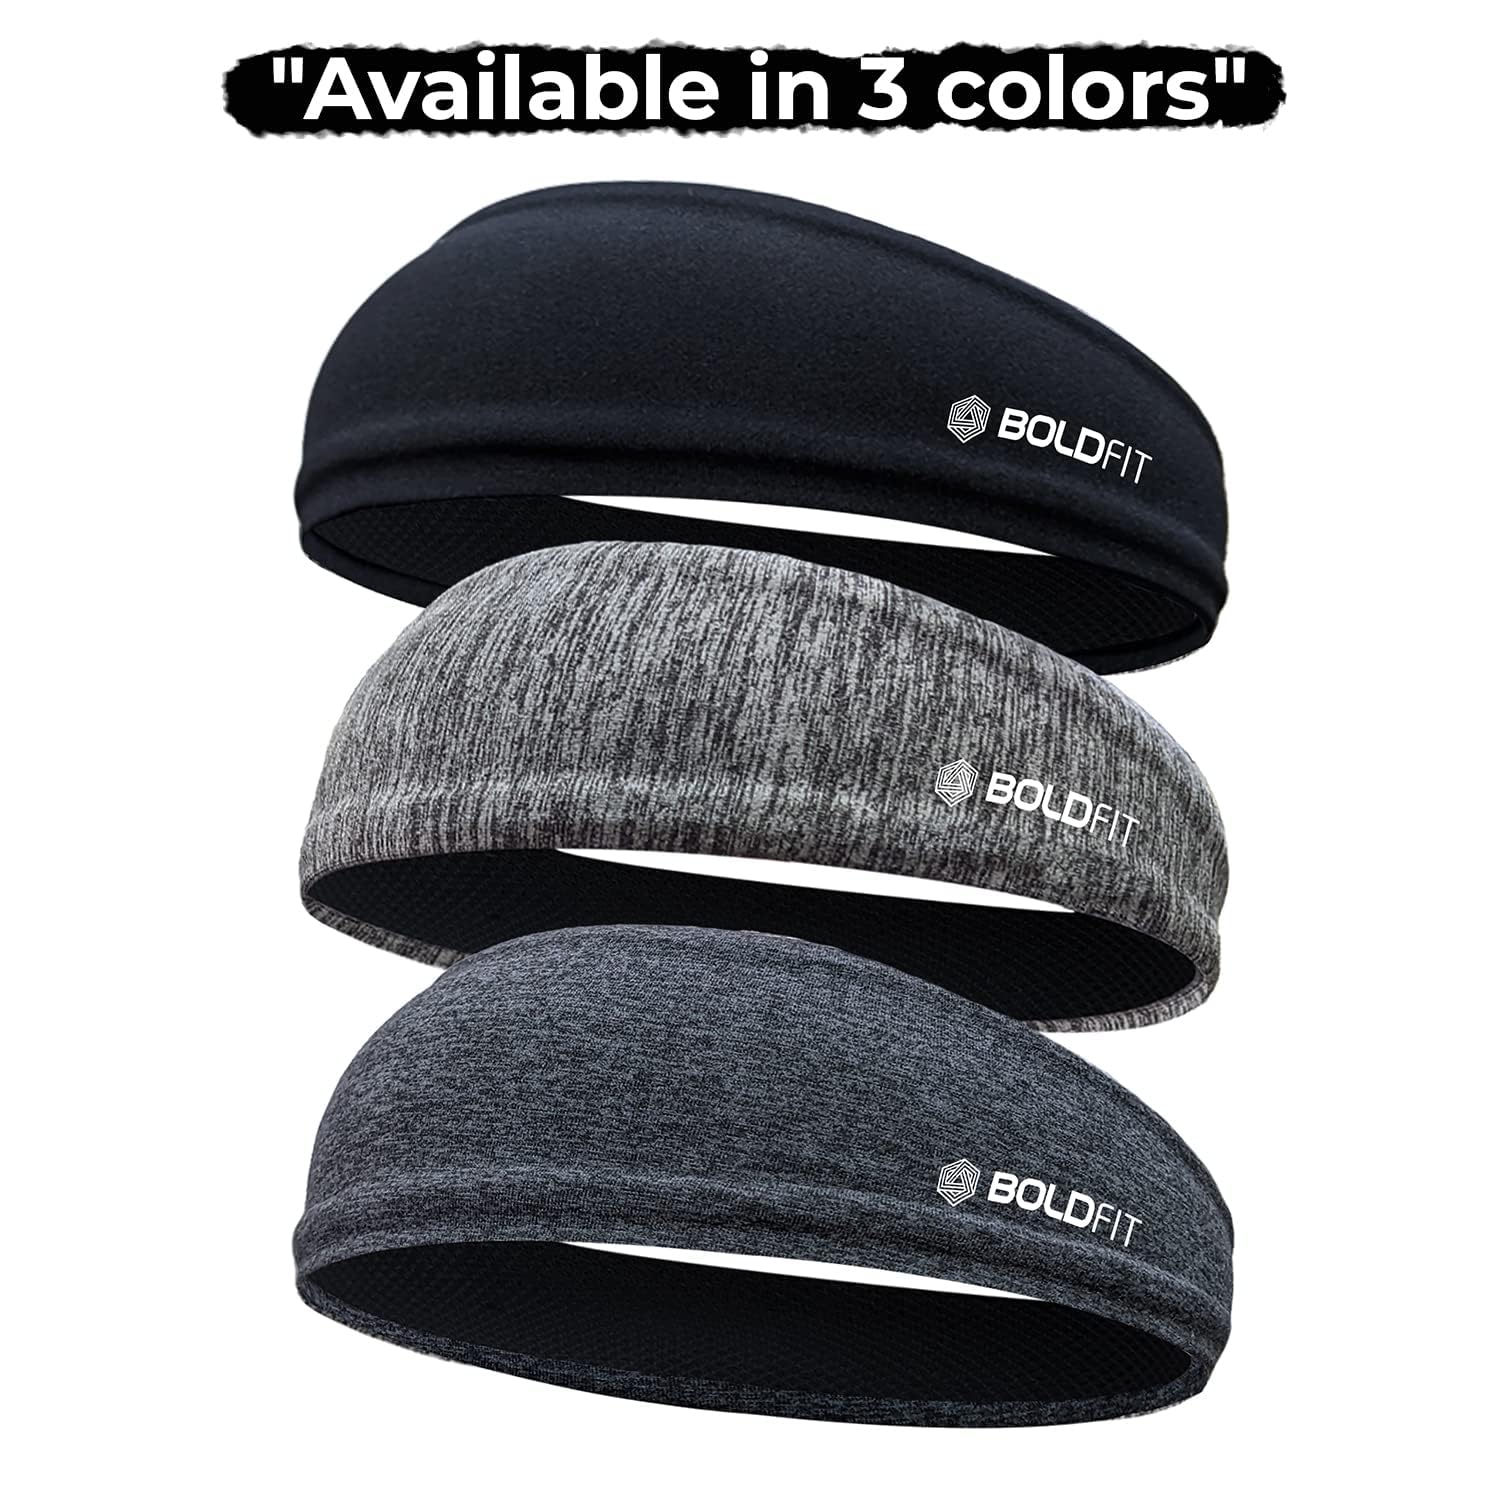 Pro head band for men and women